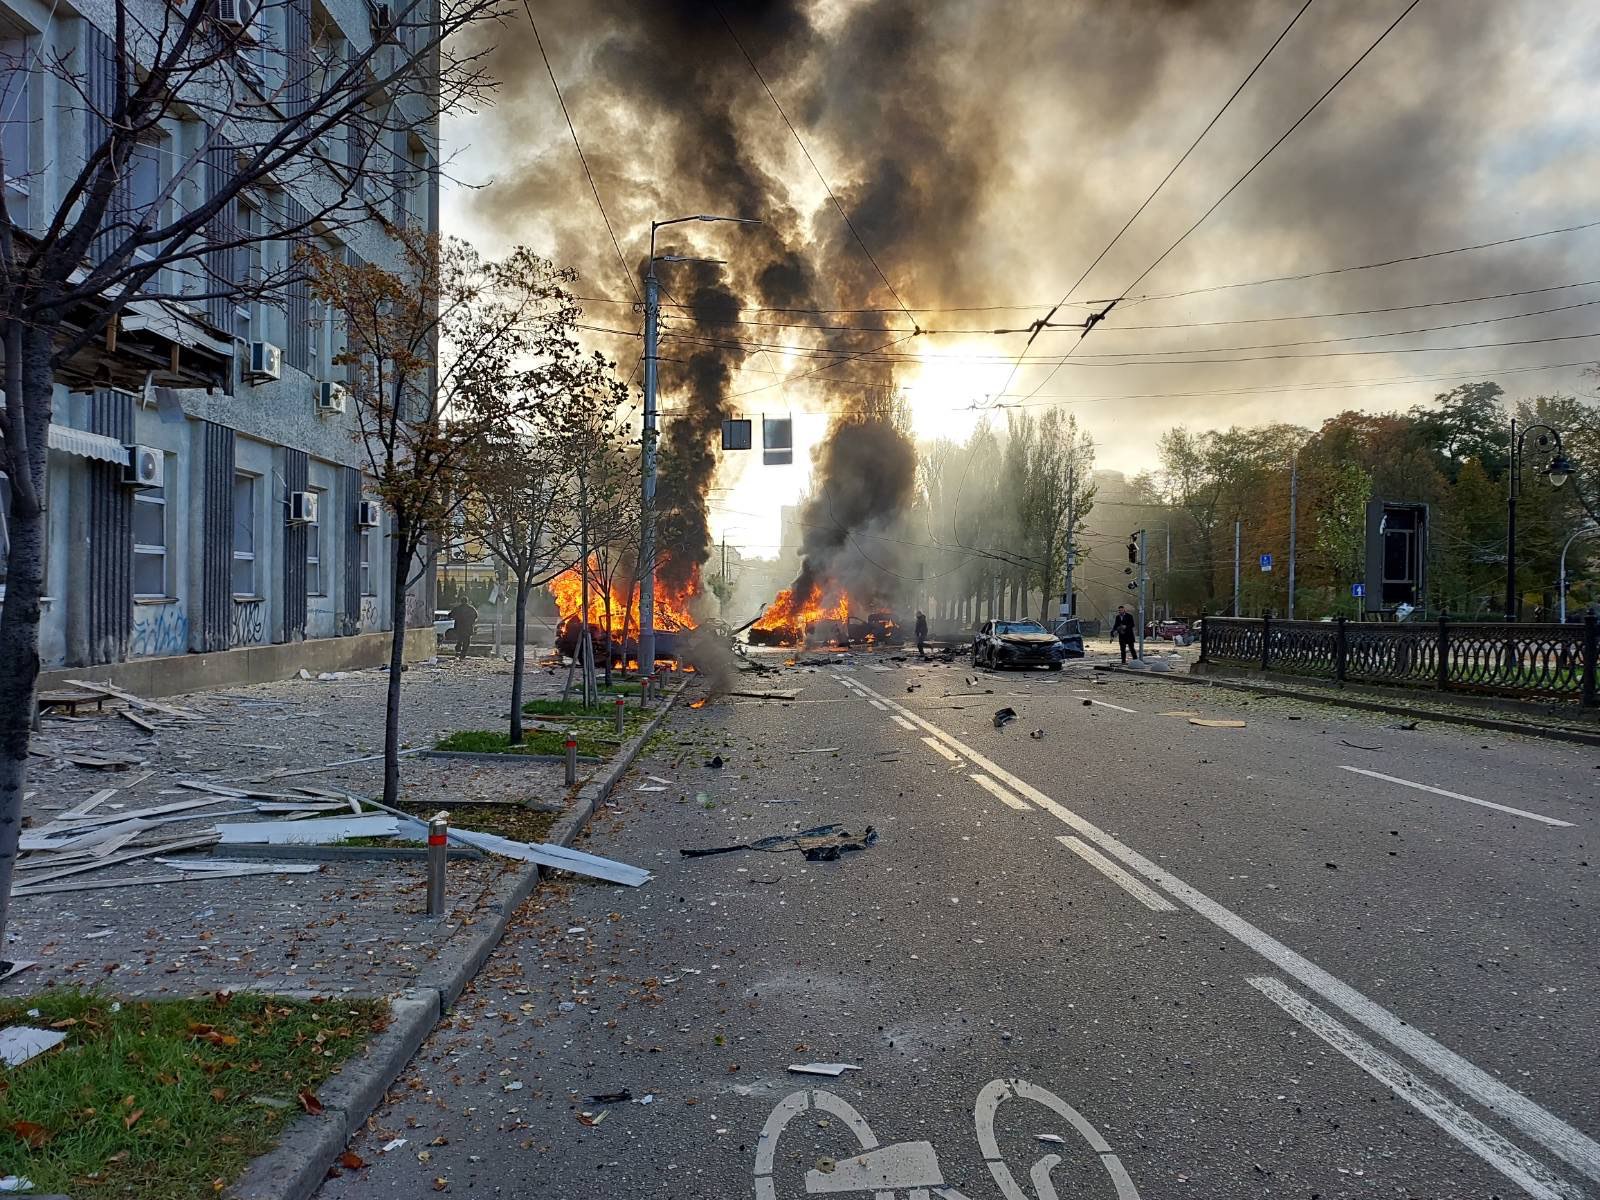 The center of kyiv after the explosions.